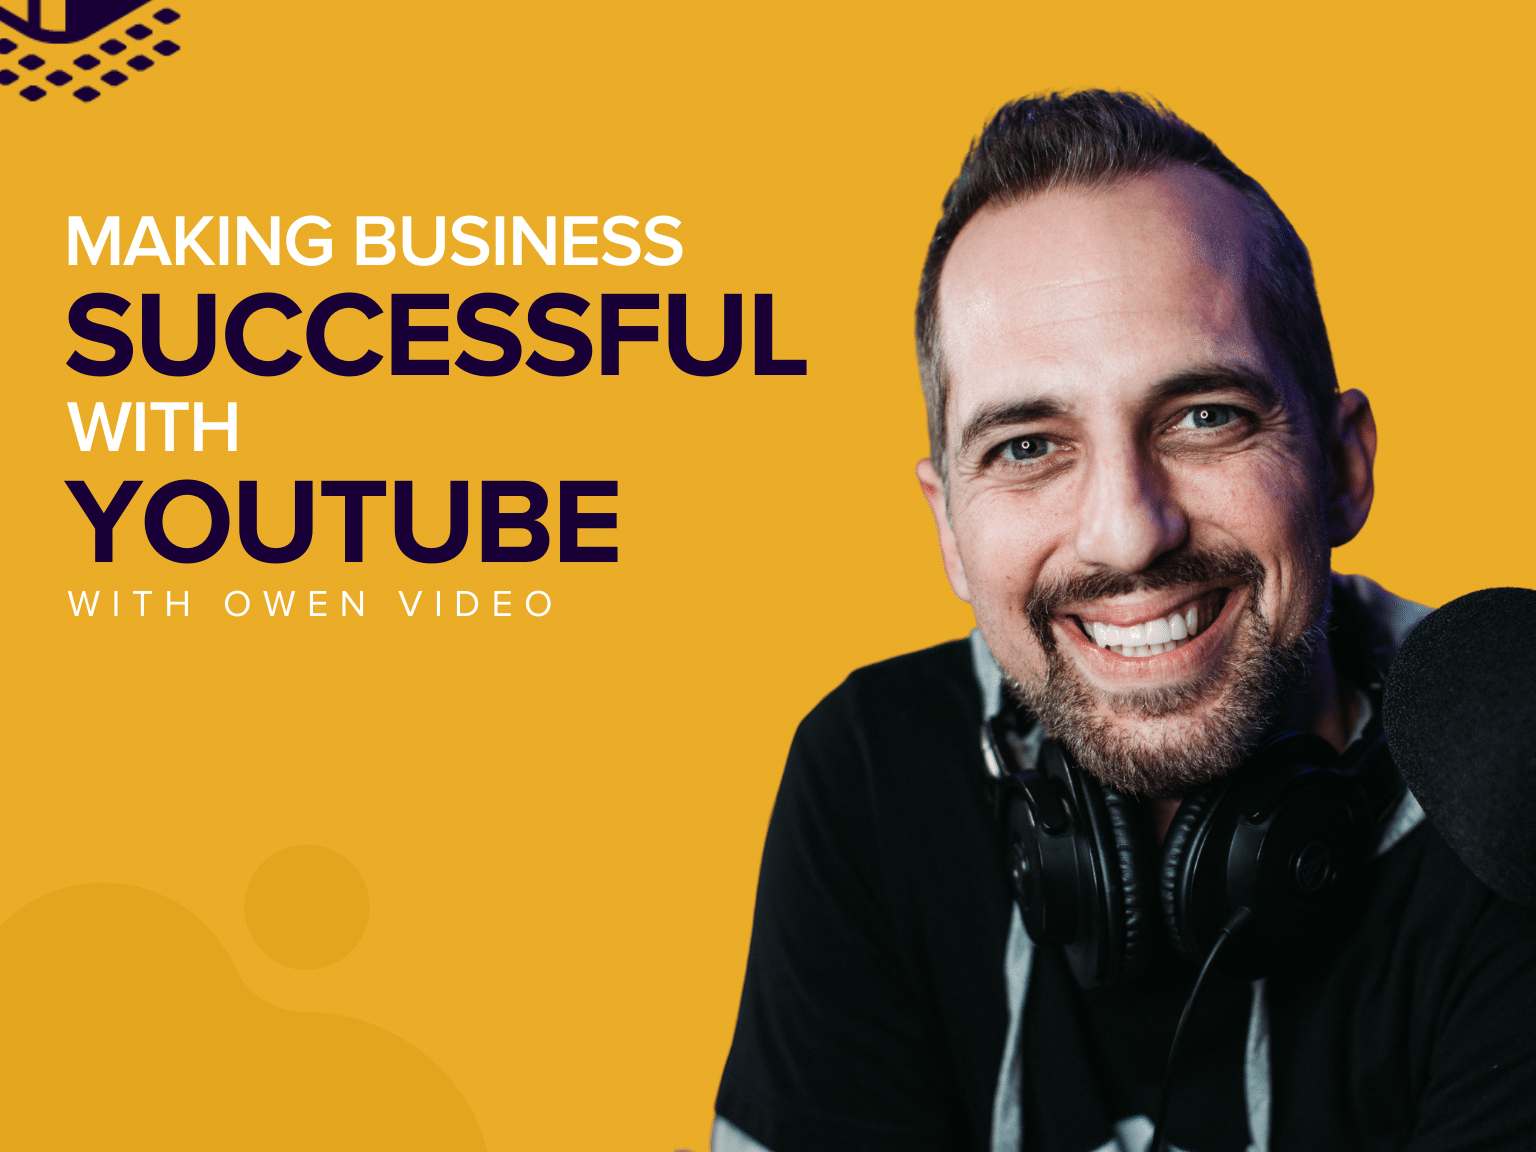 Making Business Successful with YouTube with Owen Video | The TechSmith ...